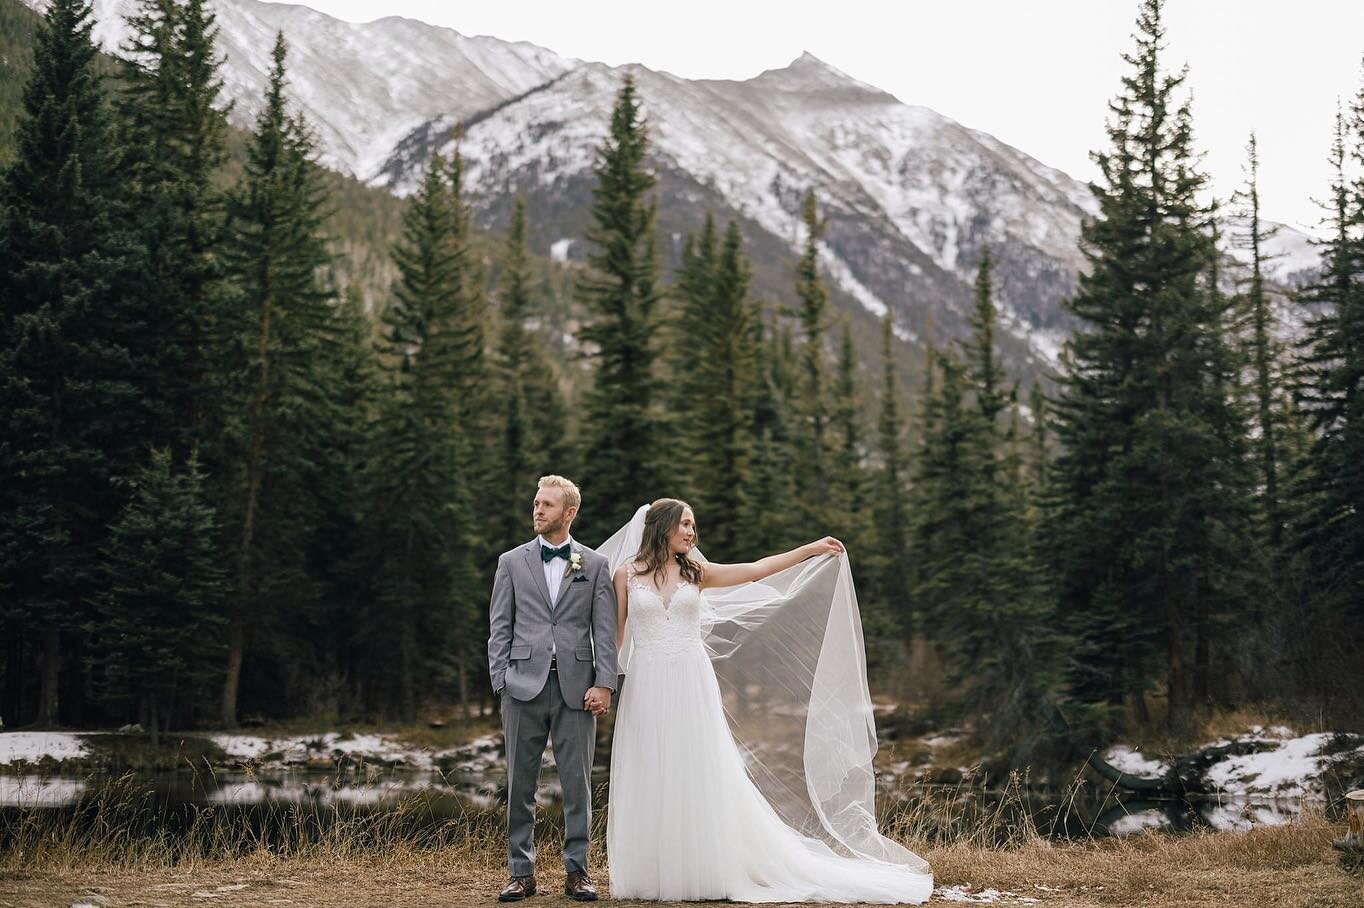 Katherine and Caleb had the most beautiful wedding this weekend. As many folks said throughout the day, their celebration was truly out of a Hallmark movie! Congrats to the bride and the groom!

Venue: Spring Canyon
Florals: Deb Schiess
Catering: Ror